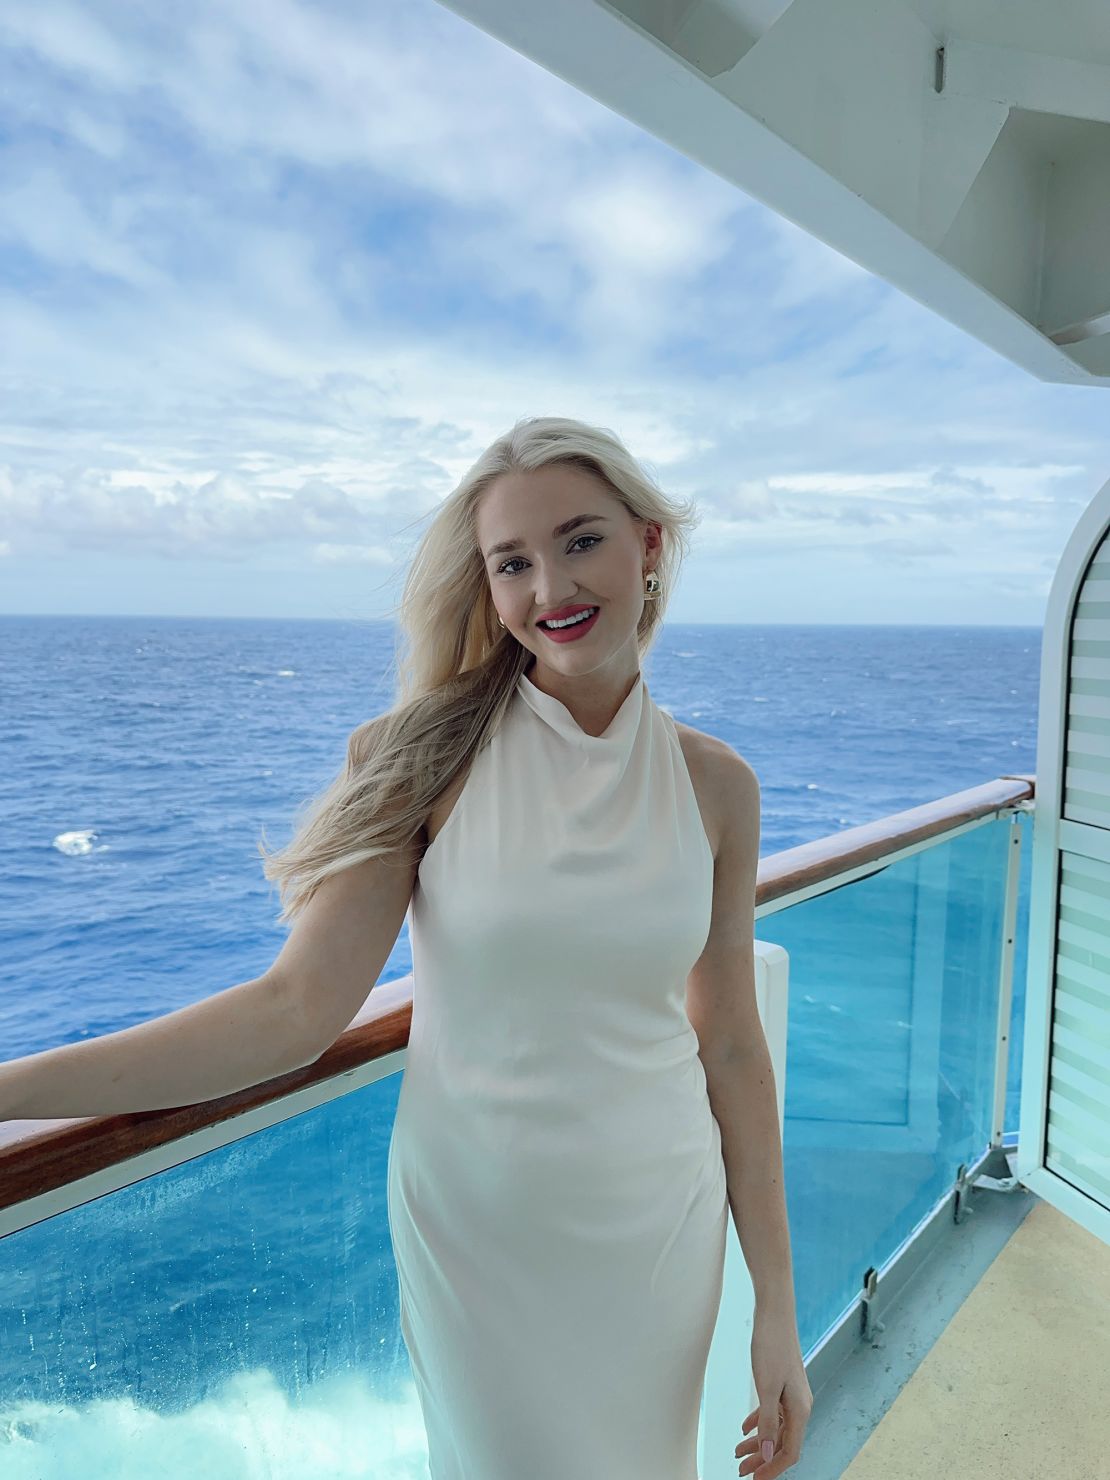 South African influencer Amike Oosthuizen expected her cruise content to resonate with TikTok users, but she "did not think it would explode as much" as it has.